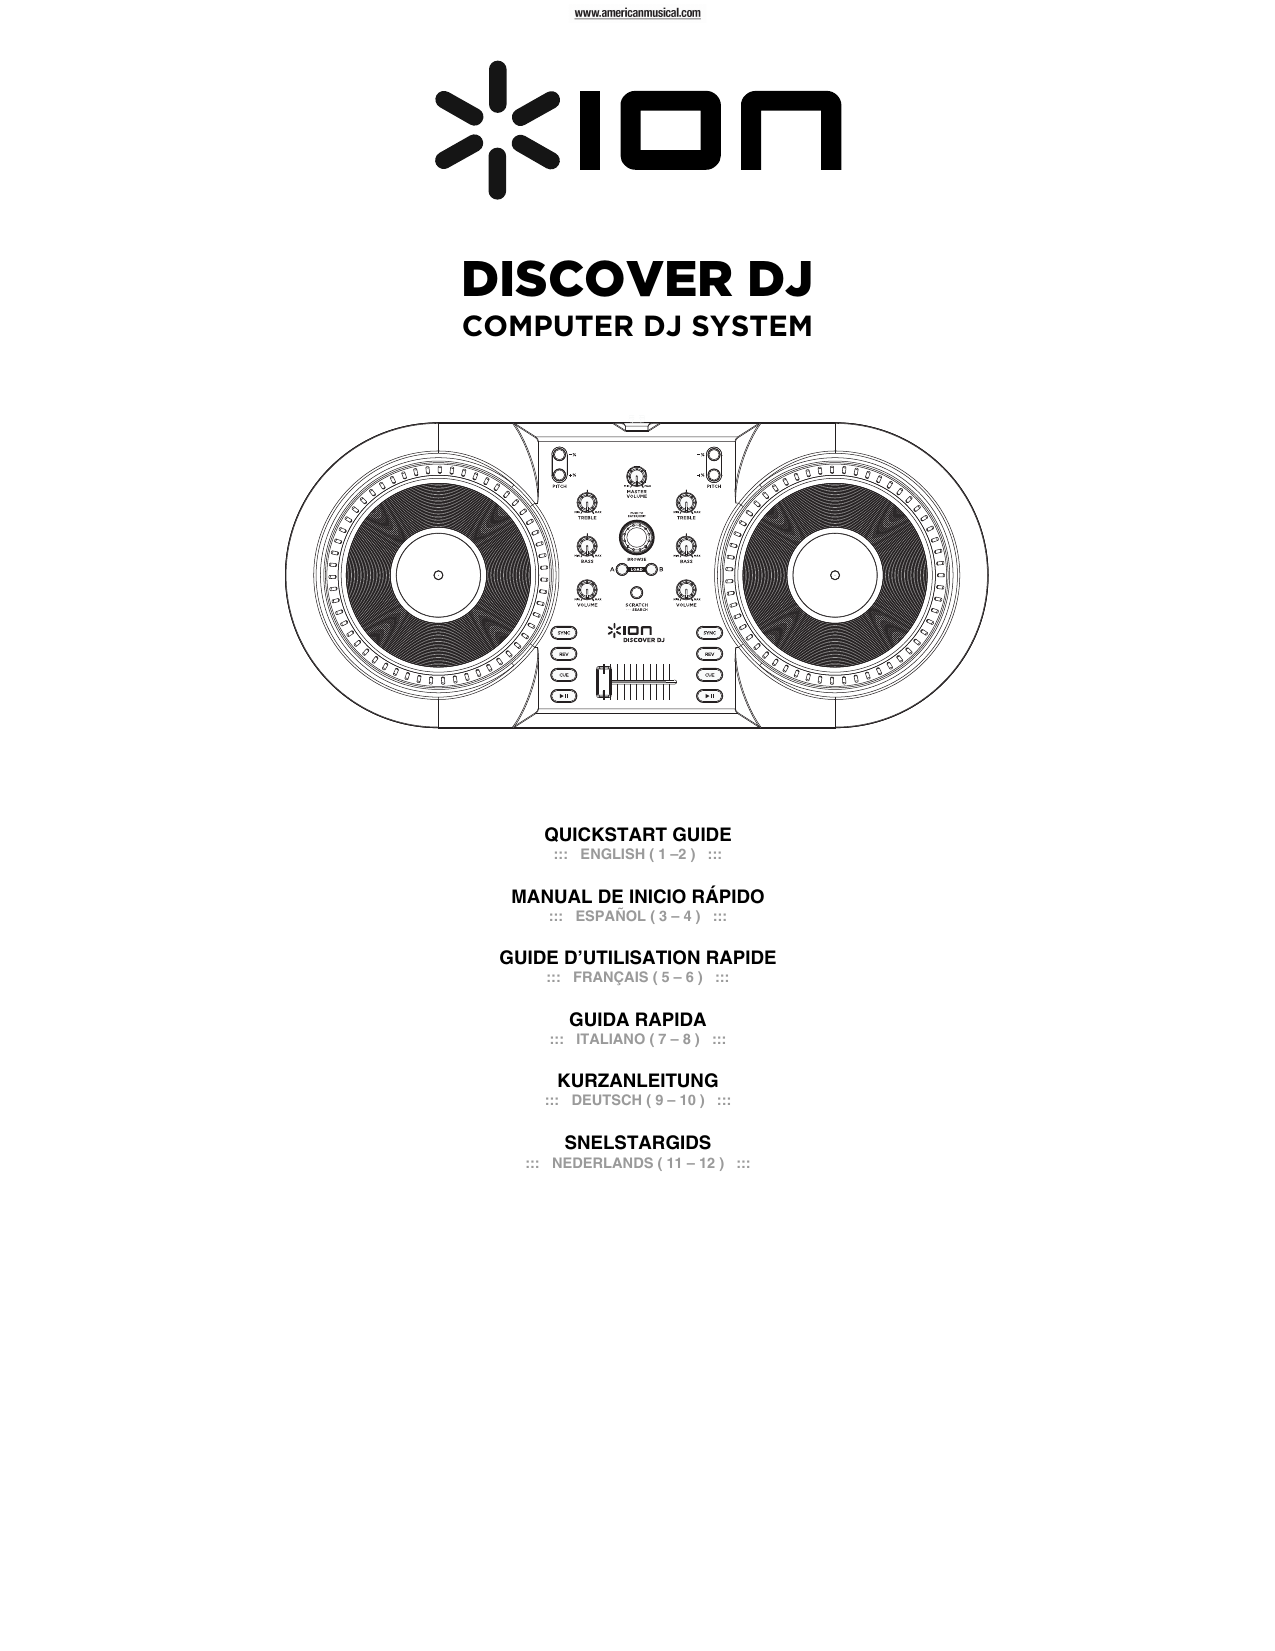 how to put music on ion discover dj